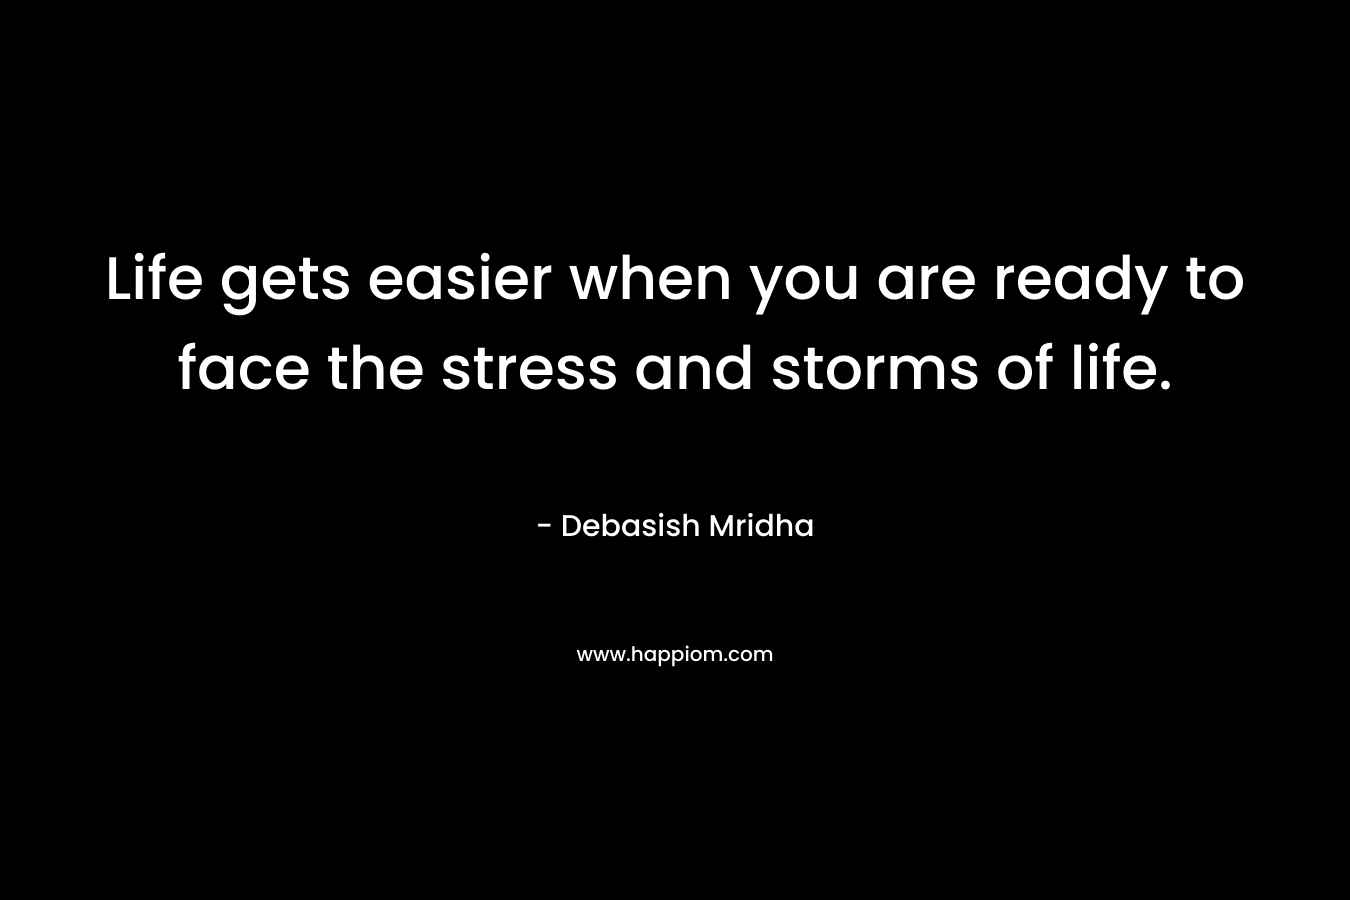 Life gets easier when you are ready to face the stress and storms of life.